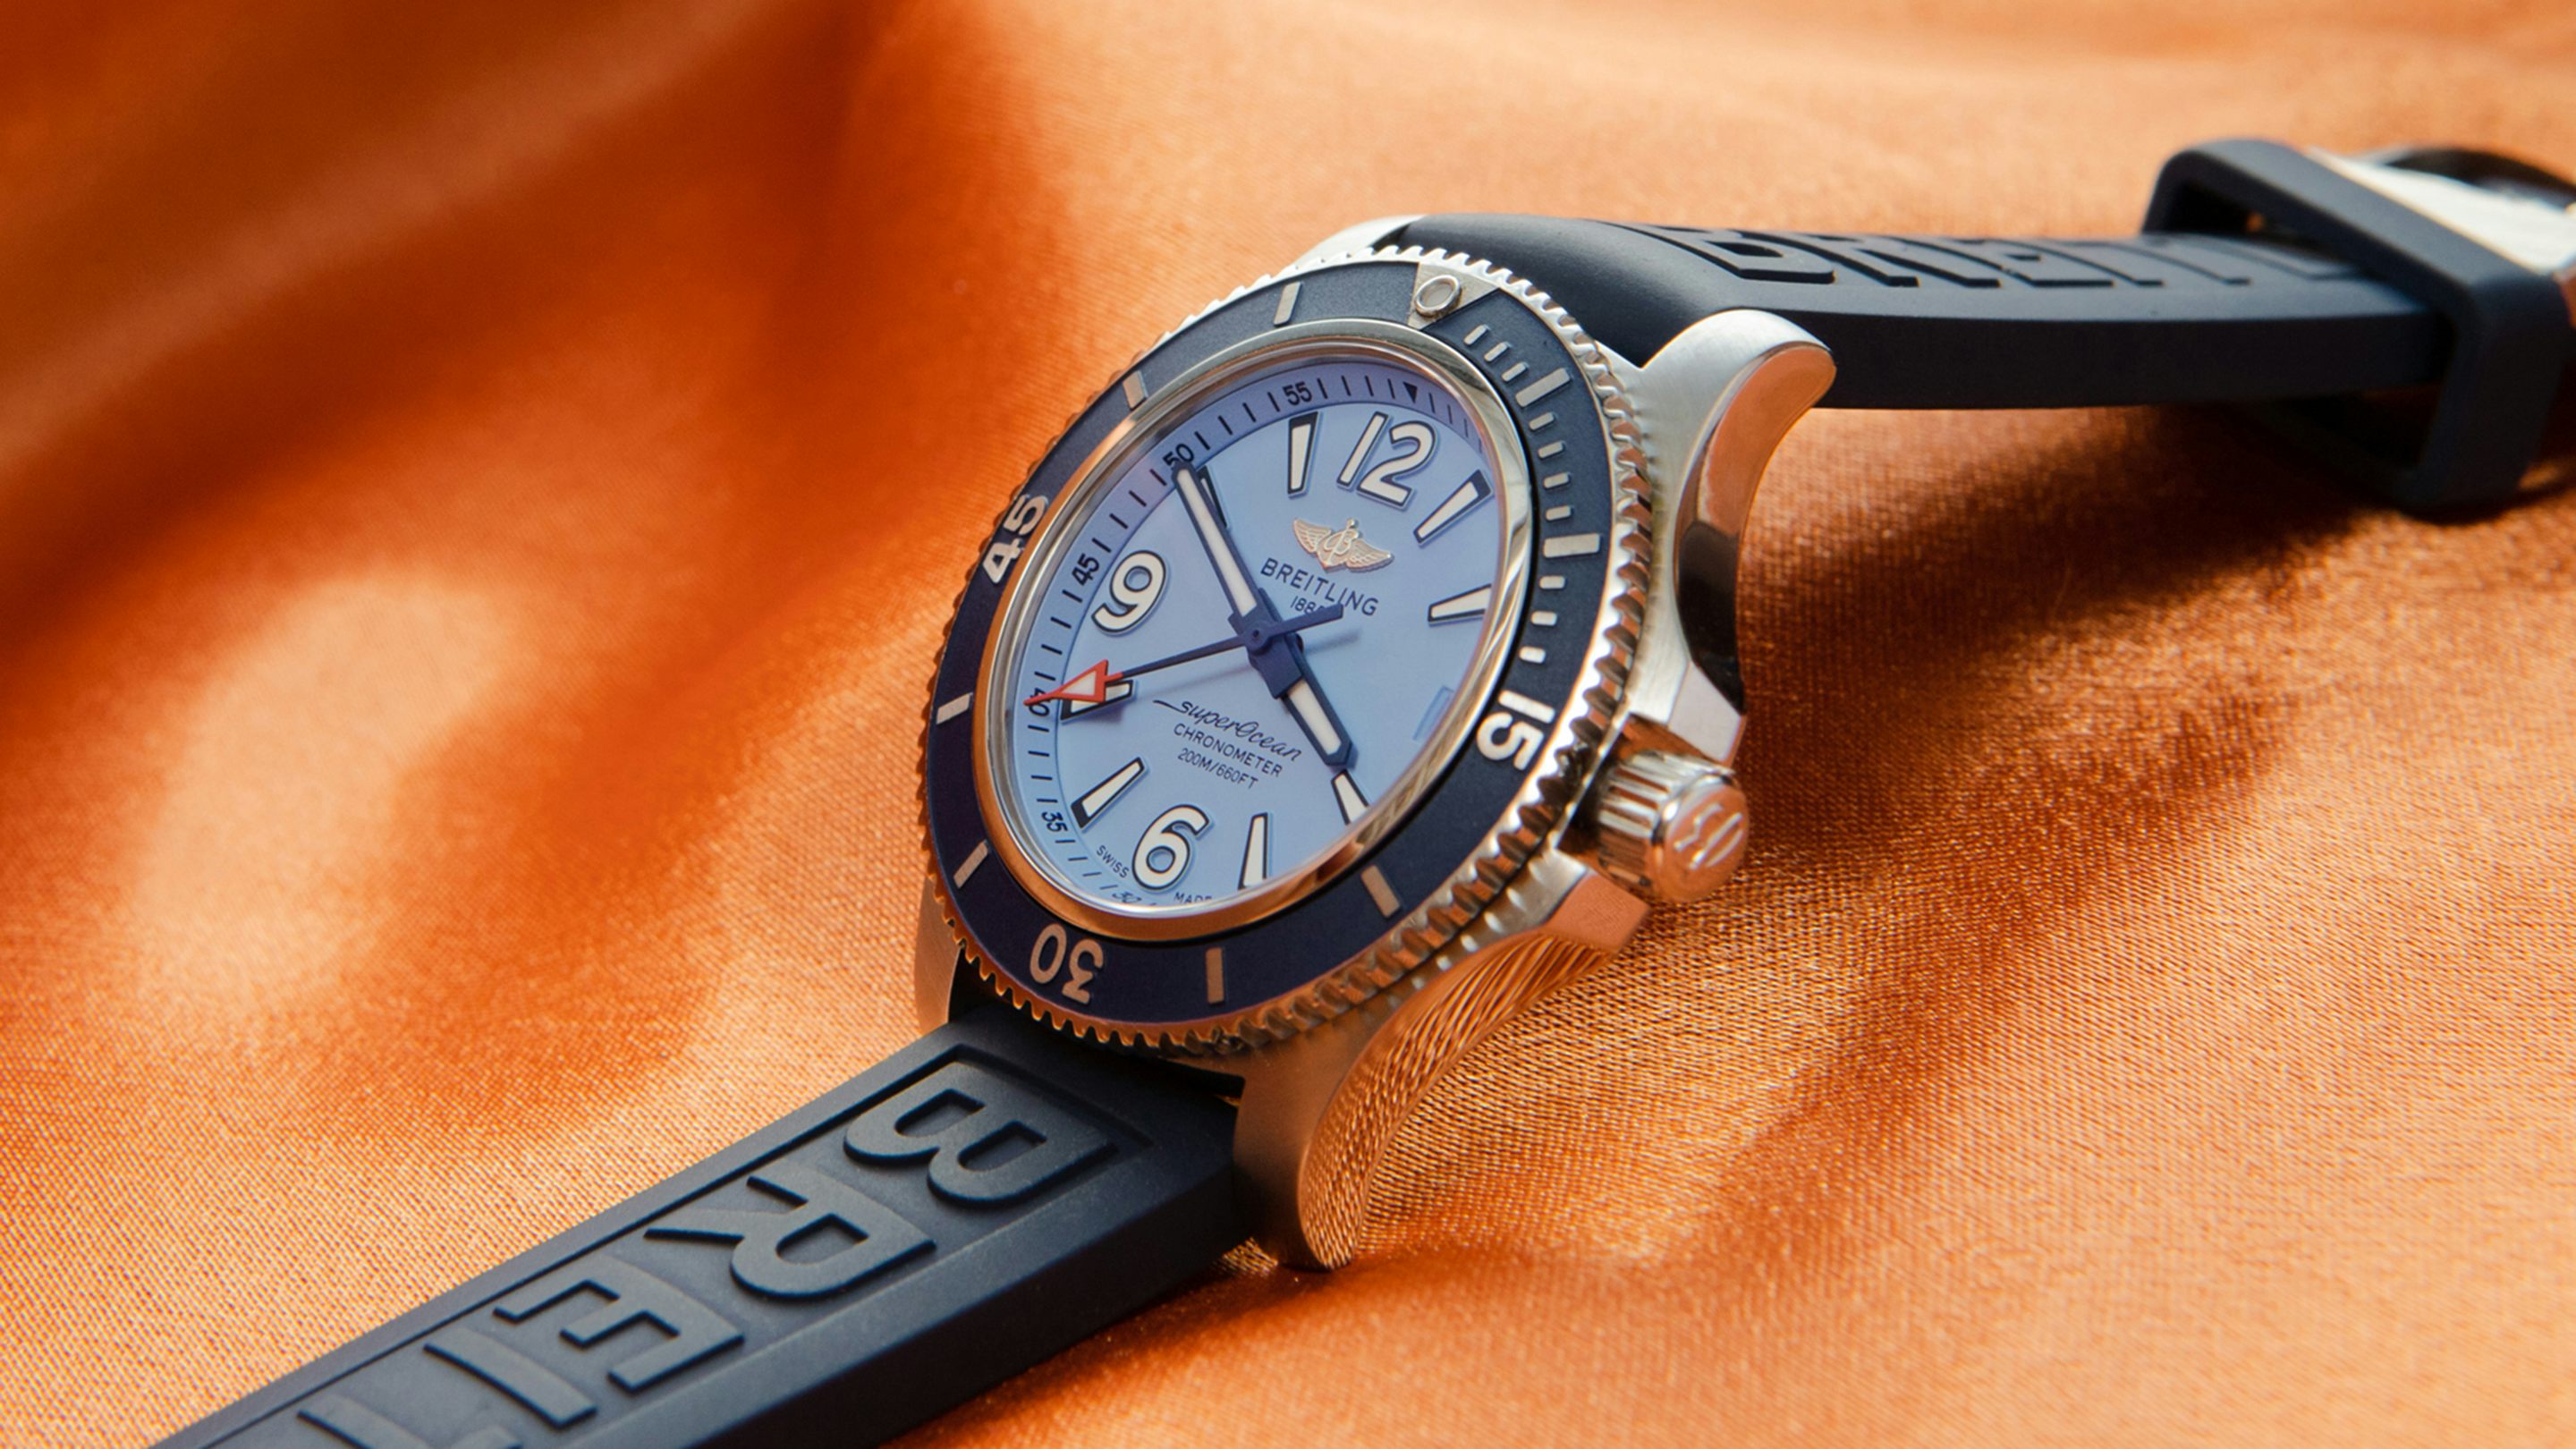 Breitling Makes One Of The Best Affordable Watches